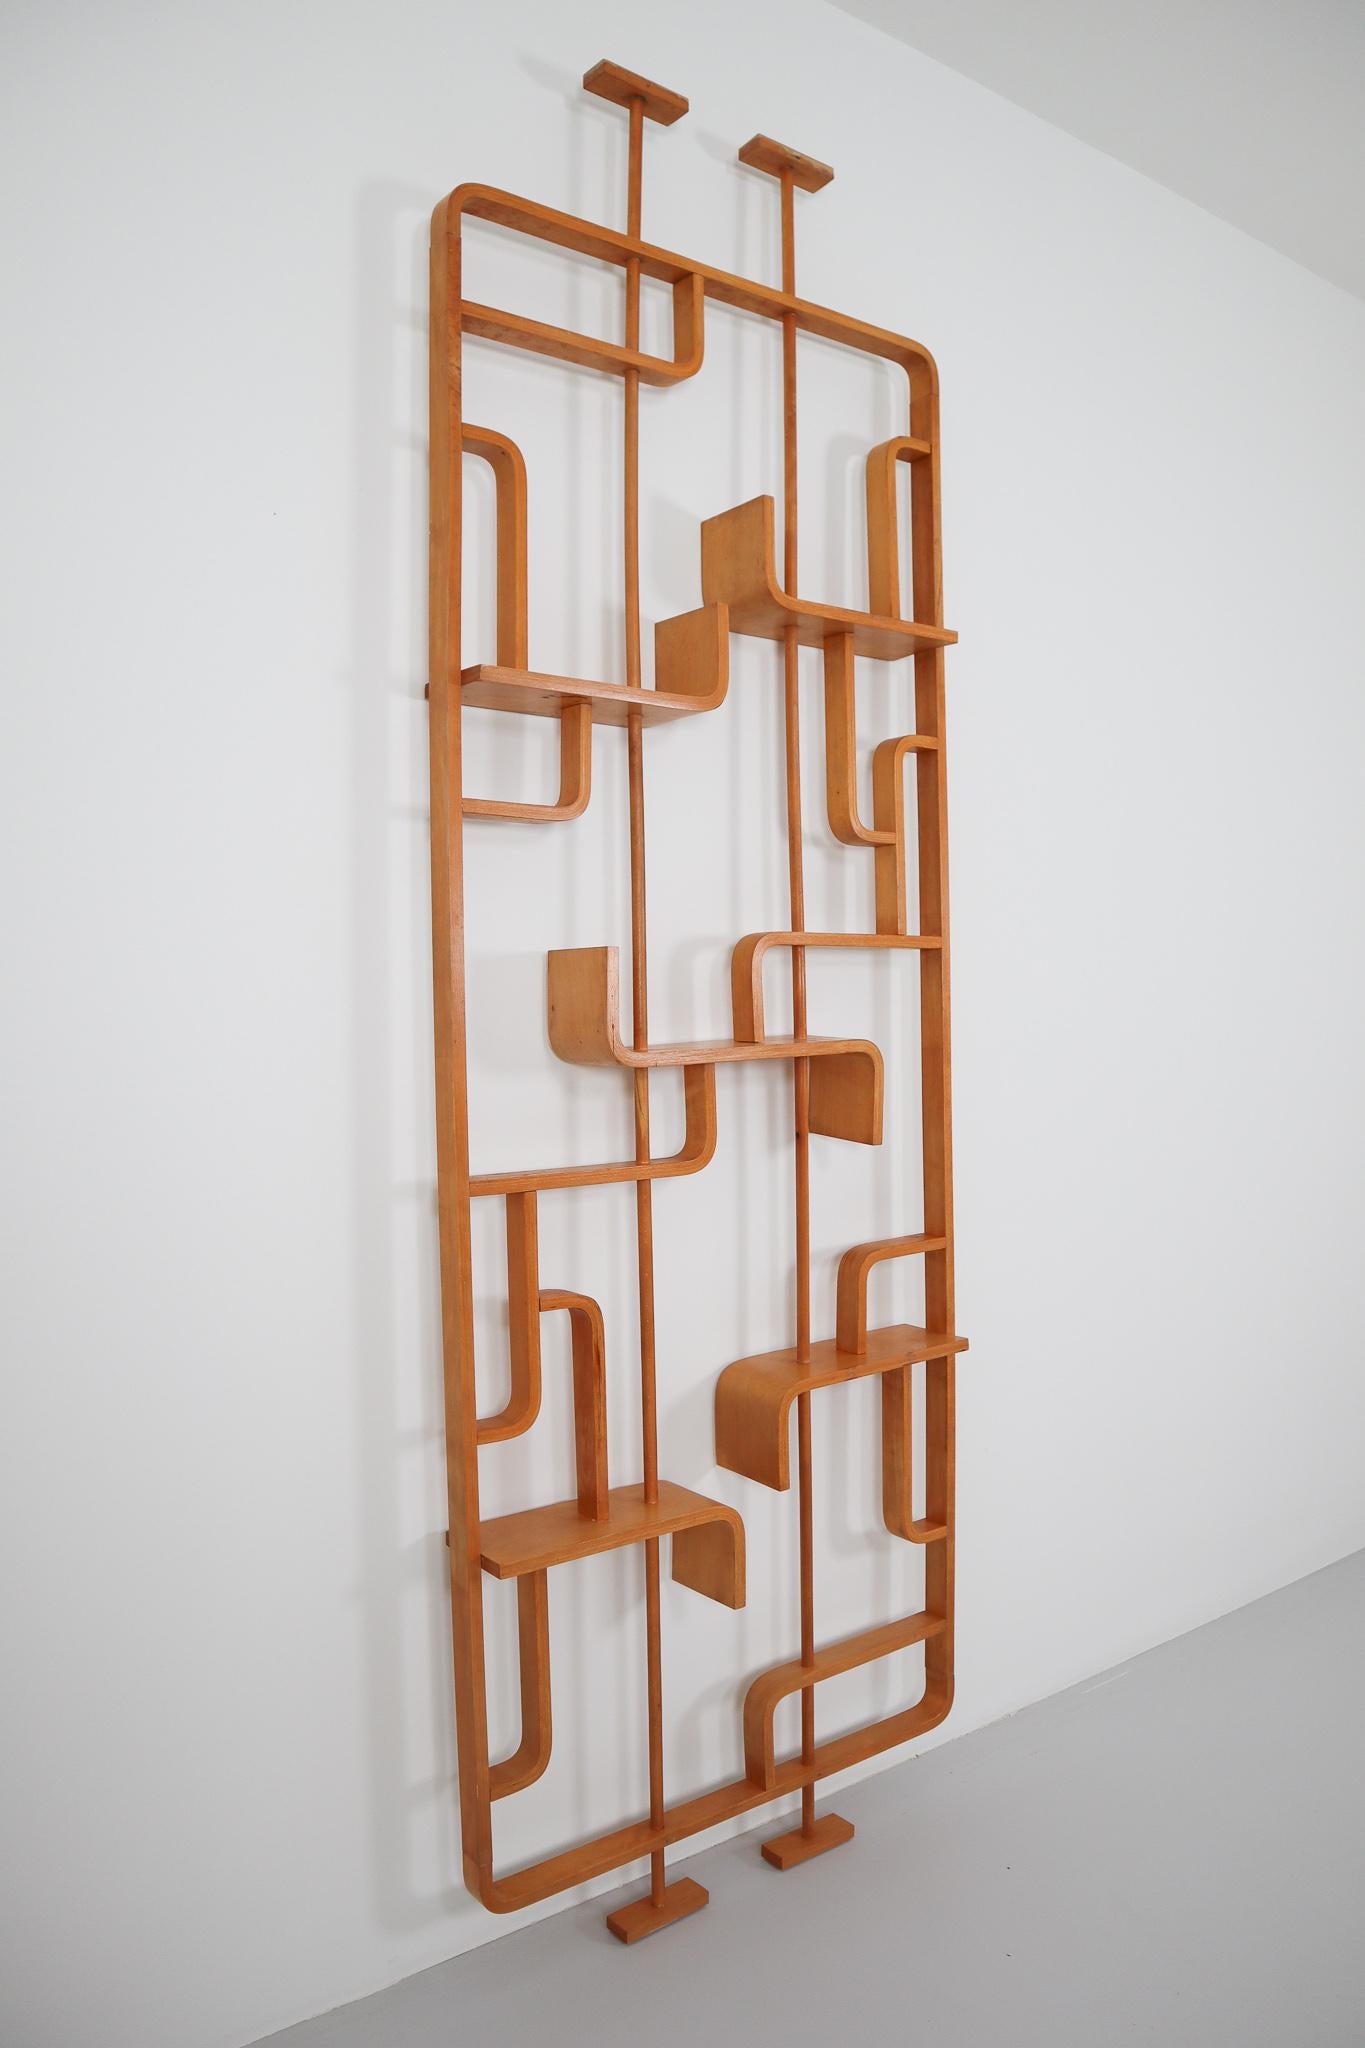 Tall midcentury flower (dividing) wall made of bentwood in blond color plywood and features geometric patterns, designed by Ludvik Volak in the Czech Republic in the 1950s-1960s and manufactured by TON (Thonet) good condition and some minor patina